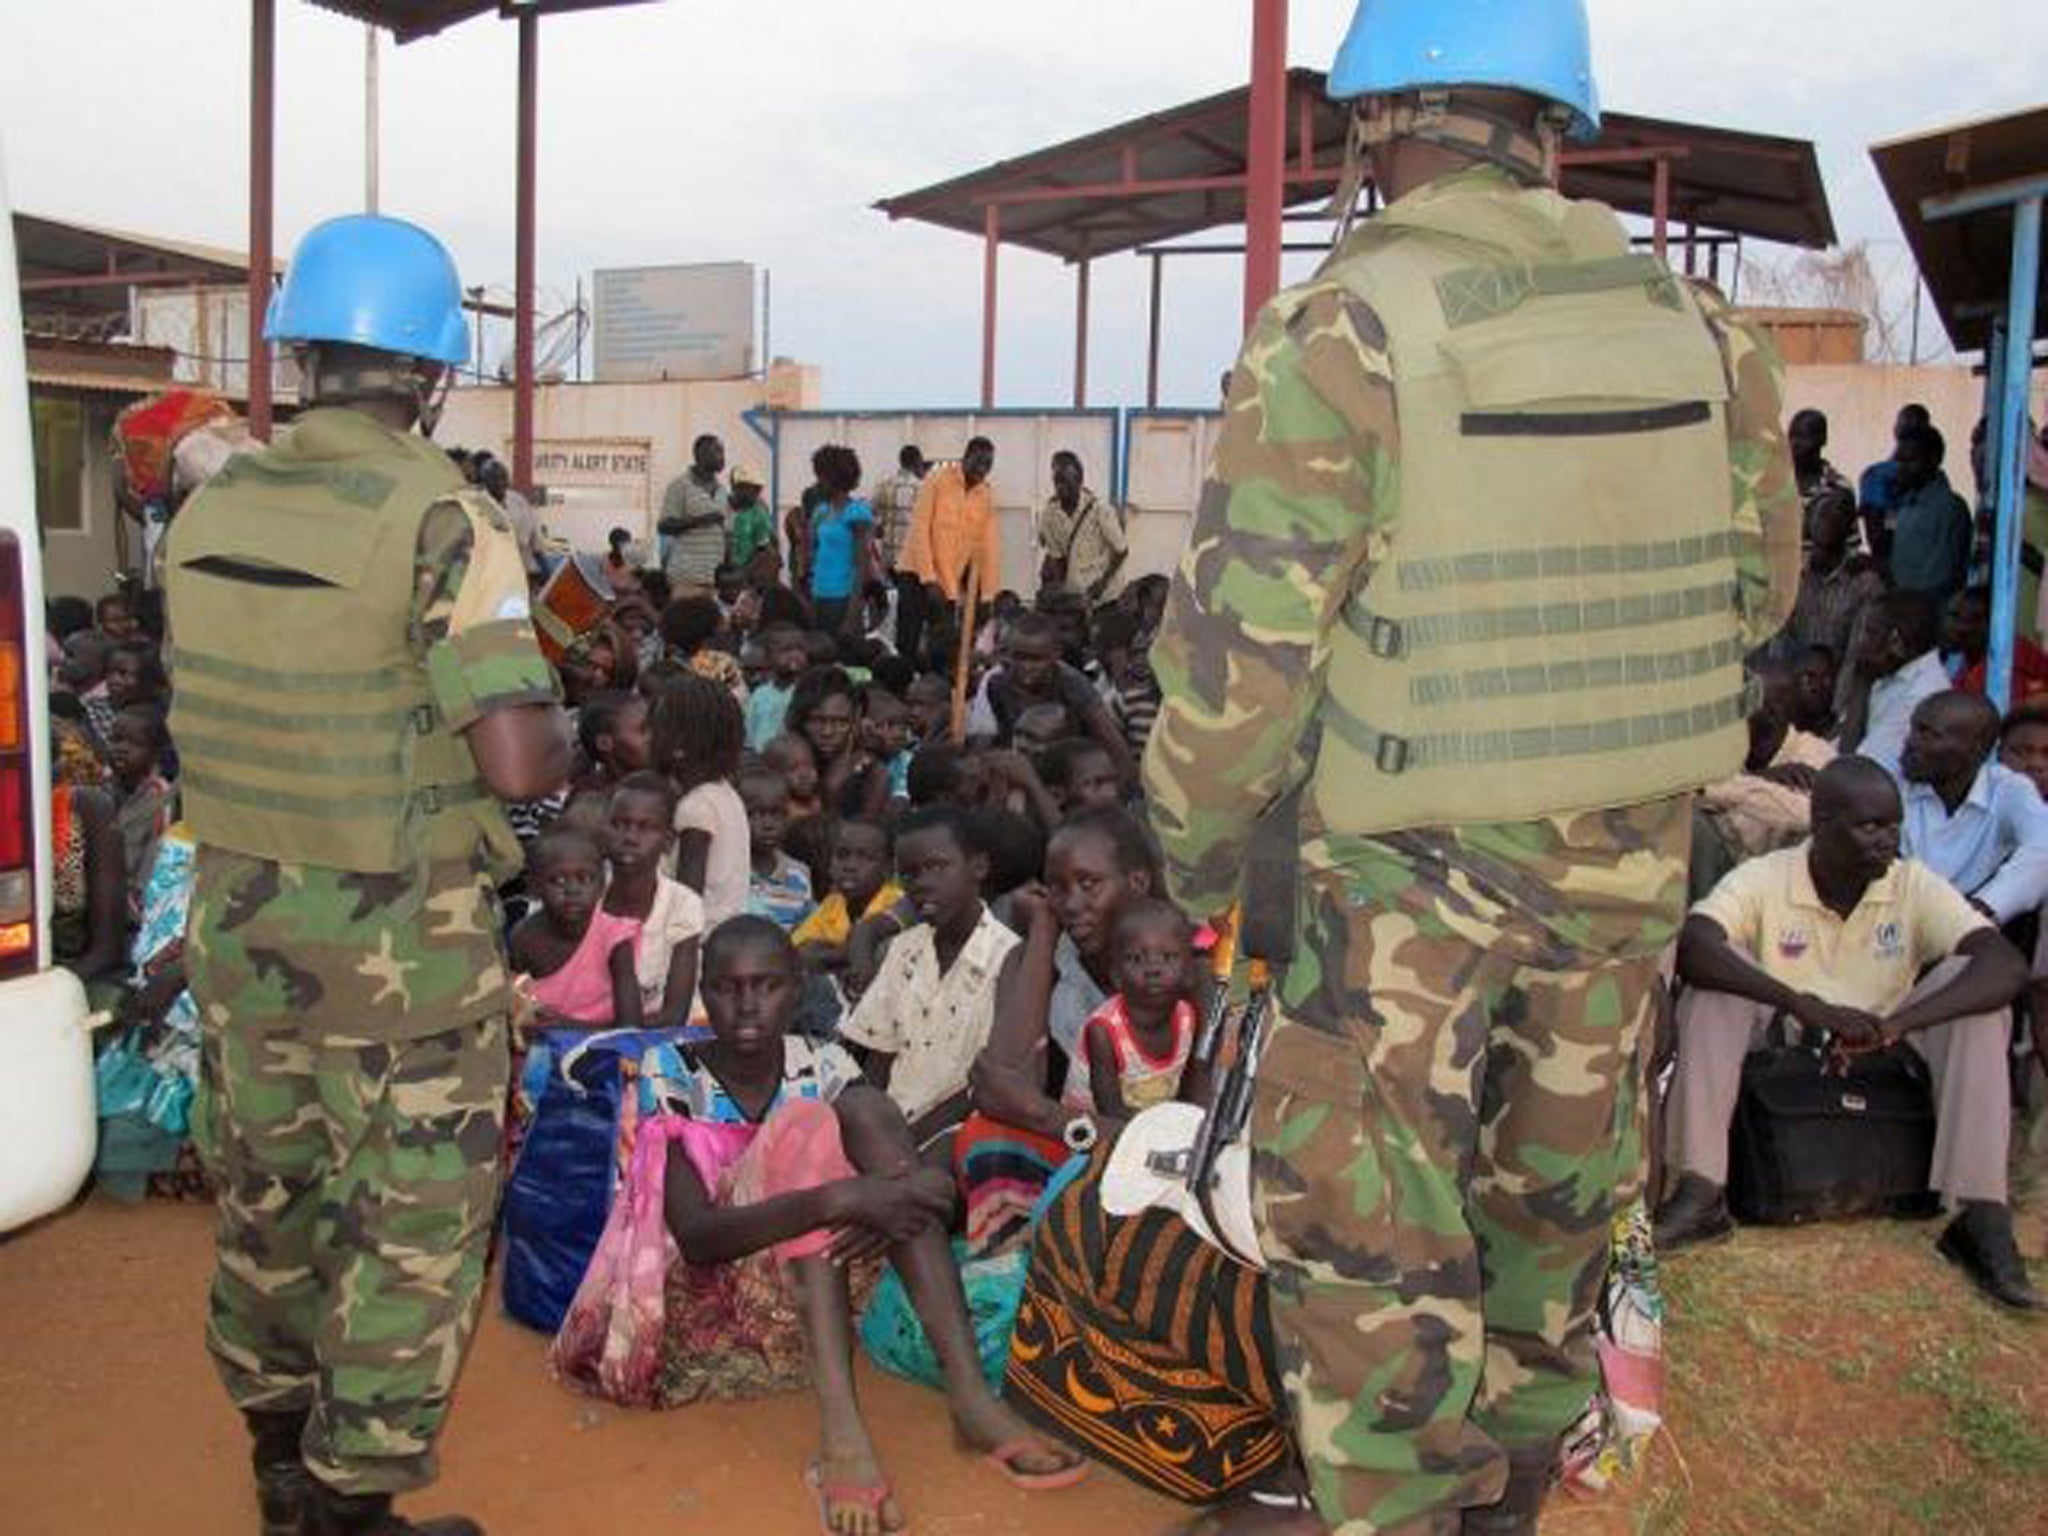 Civilians take shelter at the UN Mission compound on the outskirts of Juba